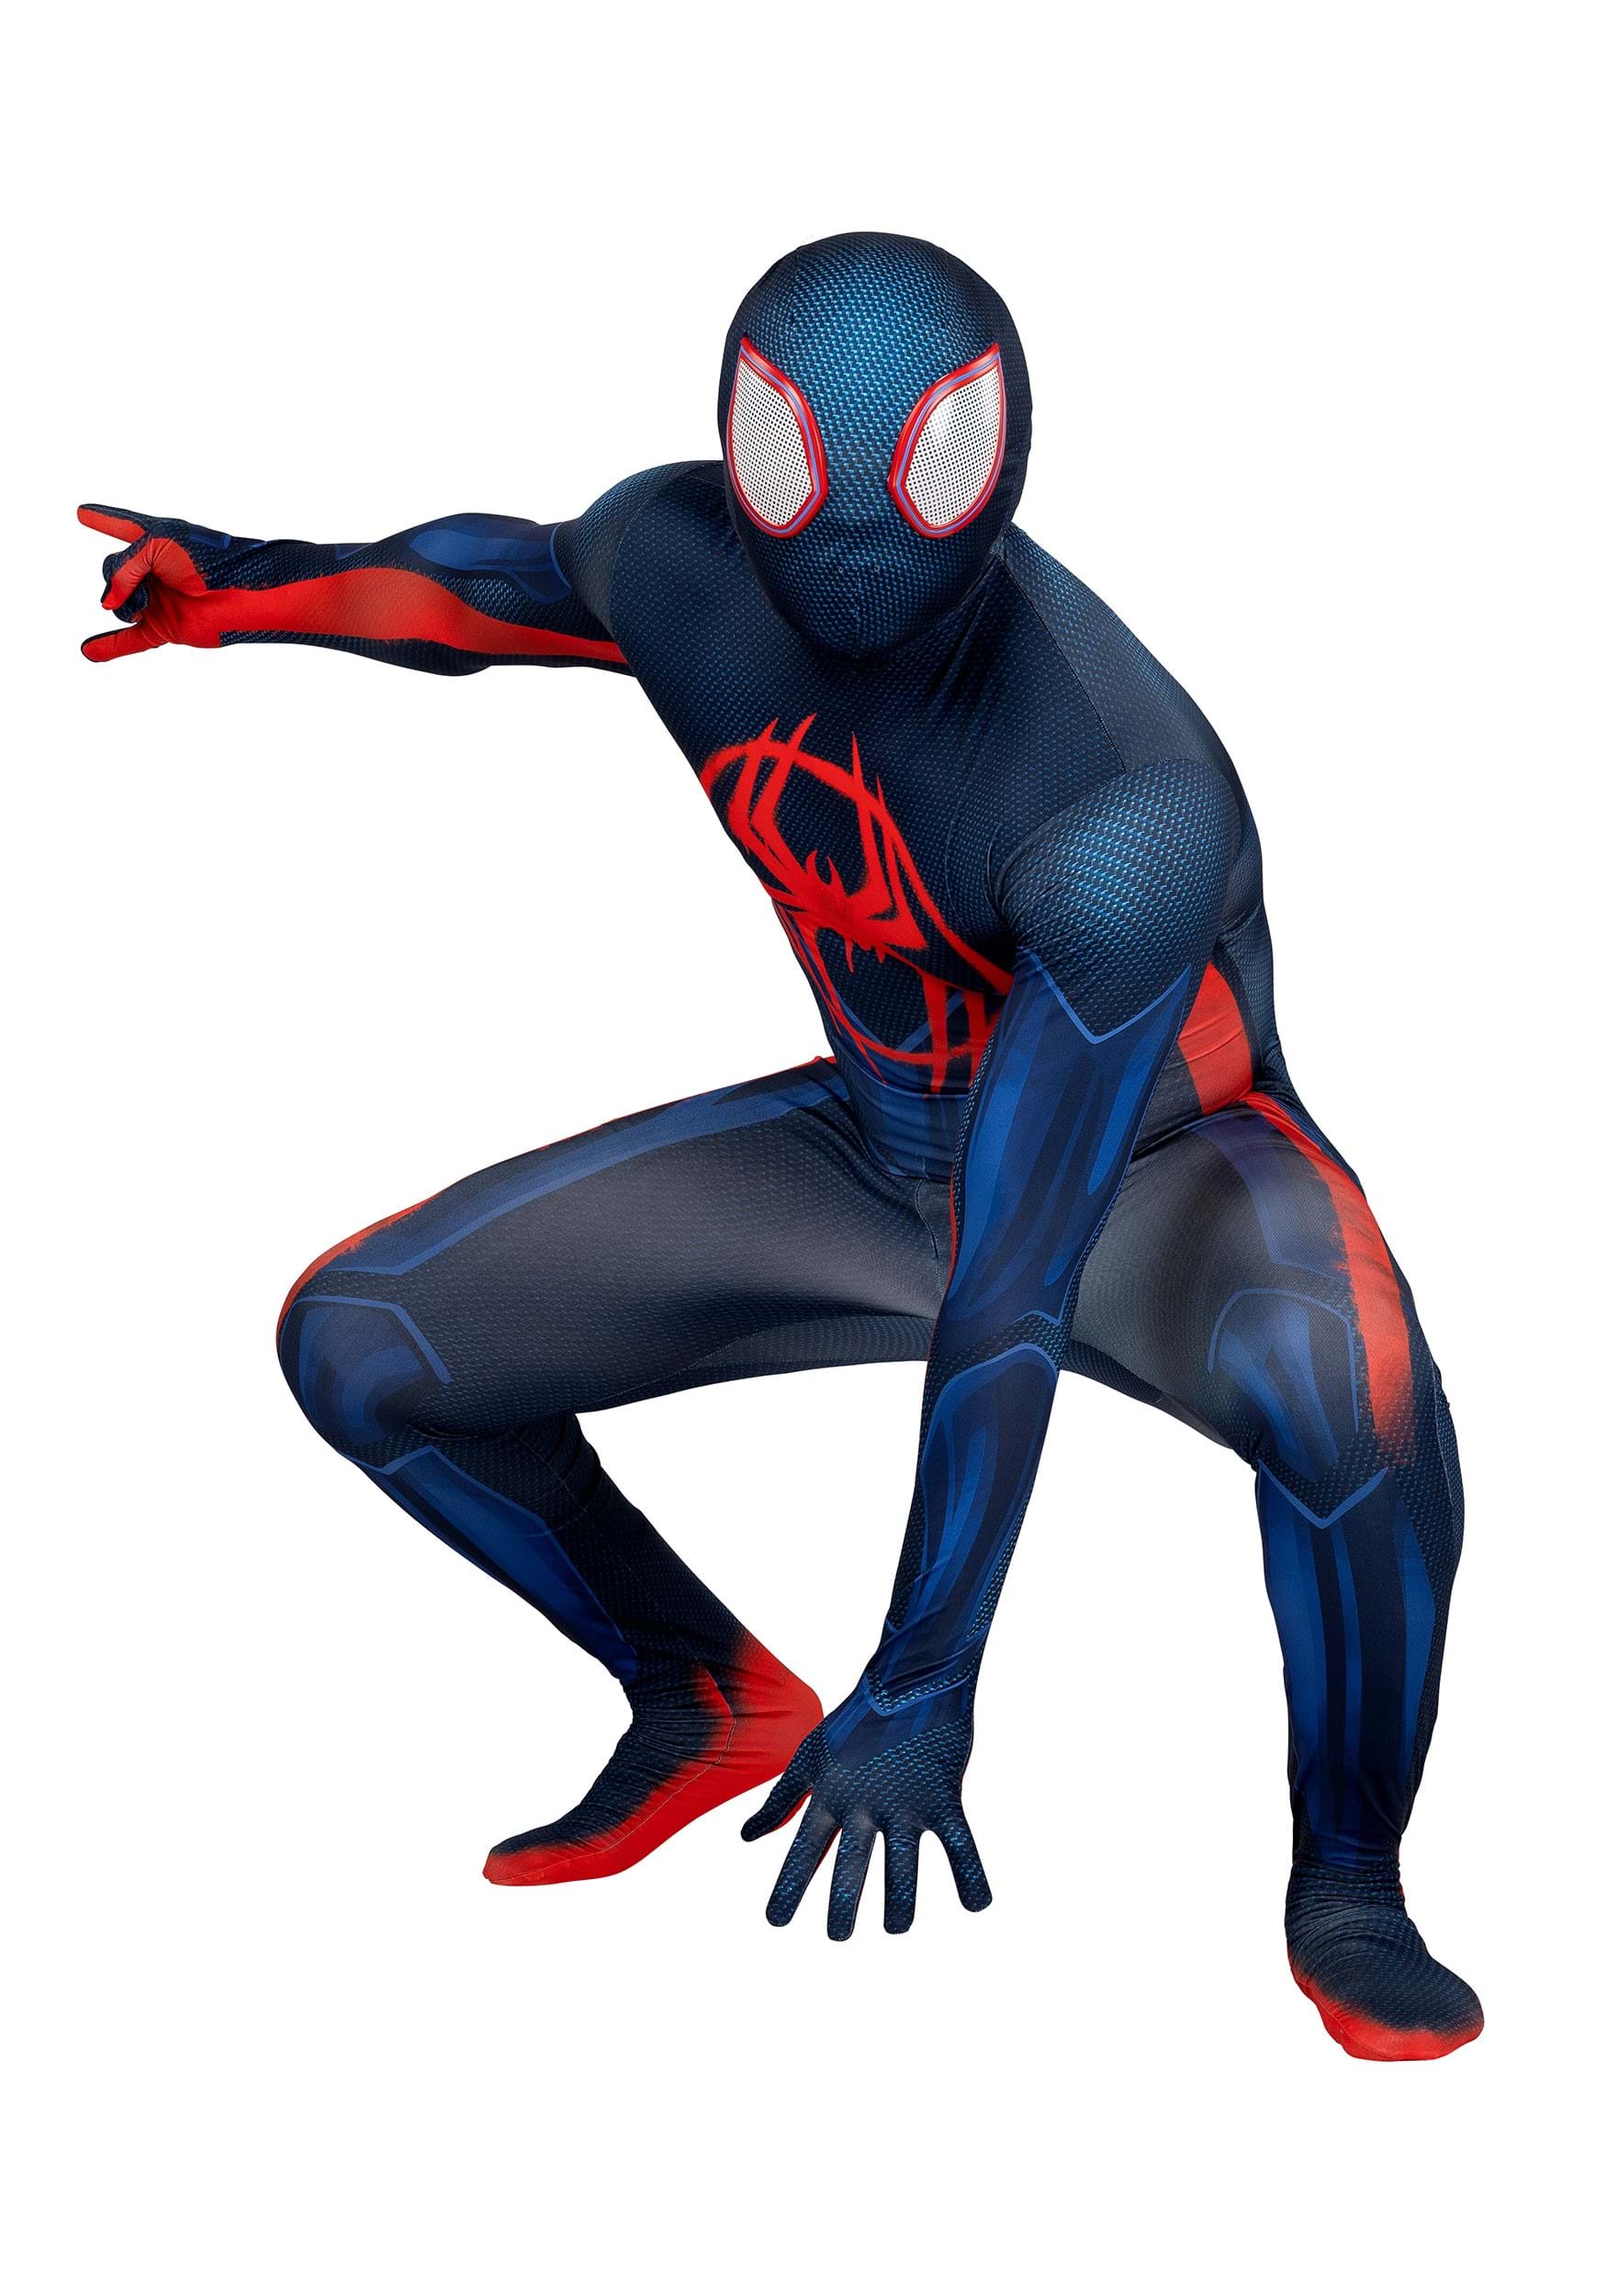 https://images.halloweencostumes.ca/products/93113/1-1/spiderverse-2-adult-miles-morales-zentai-suit-main-upd.jpg